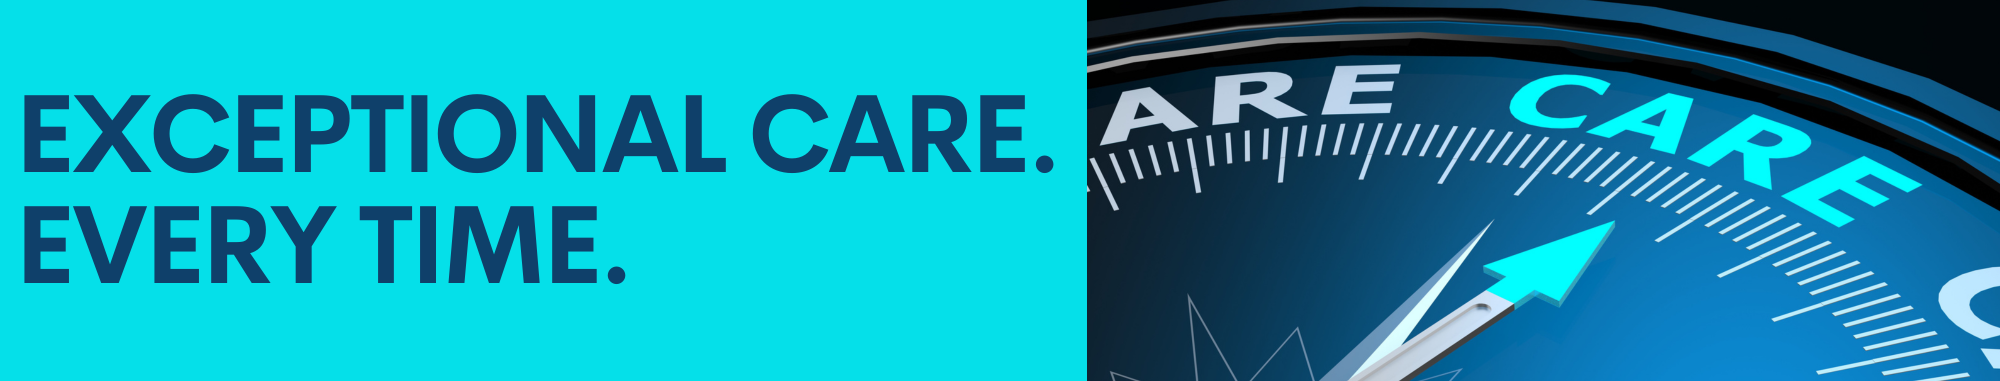 EXCEPTIONAL CARE.
EVERY TIME.